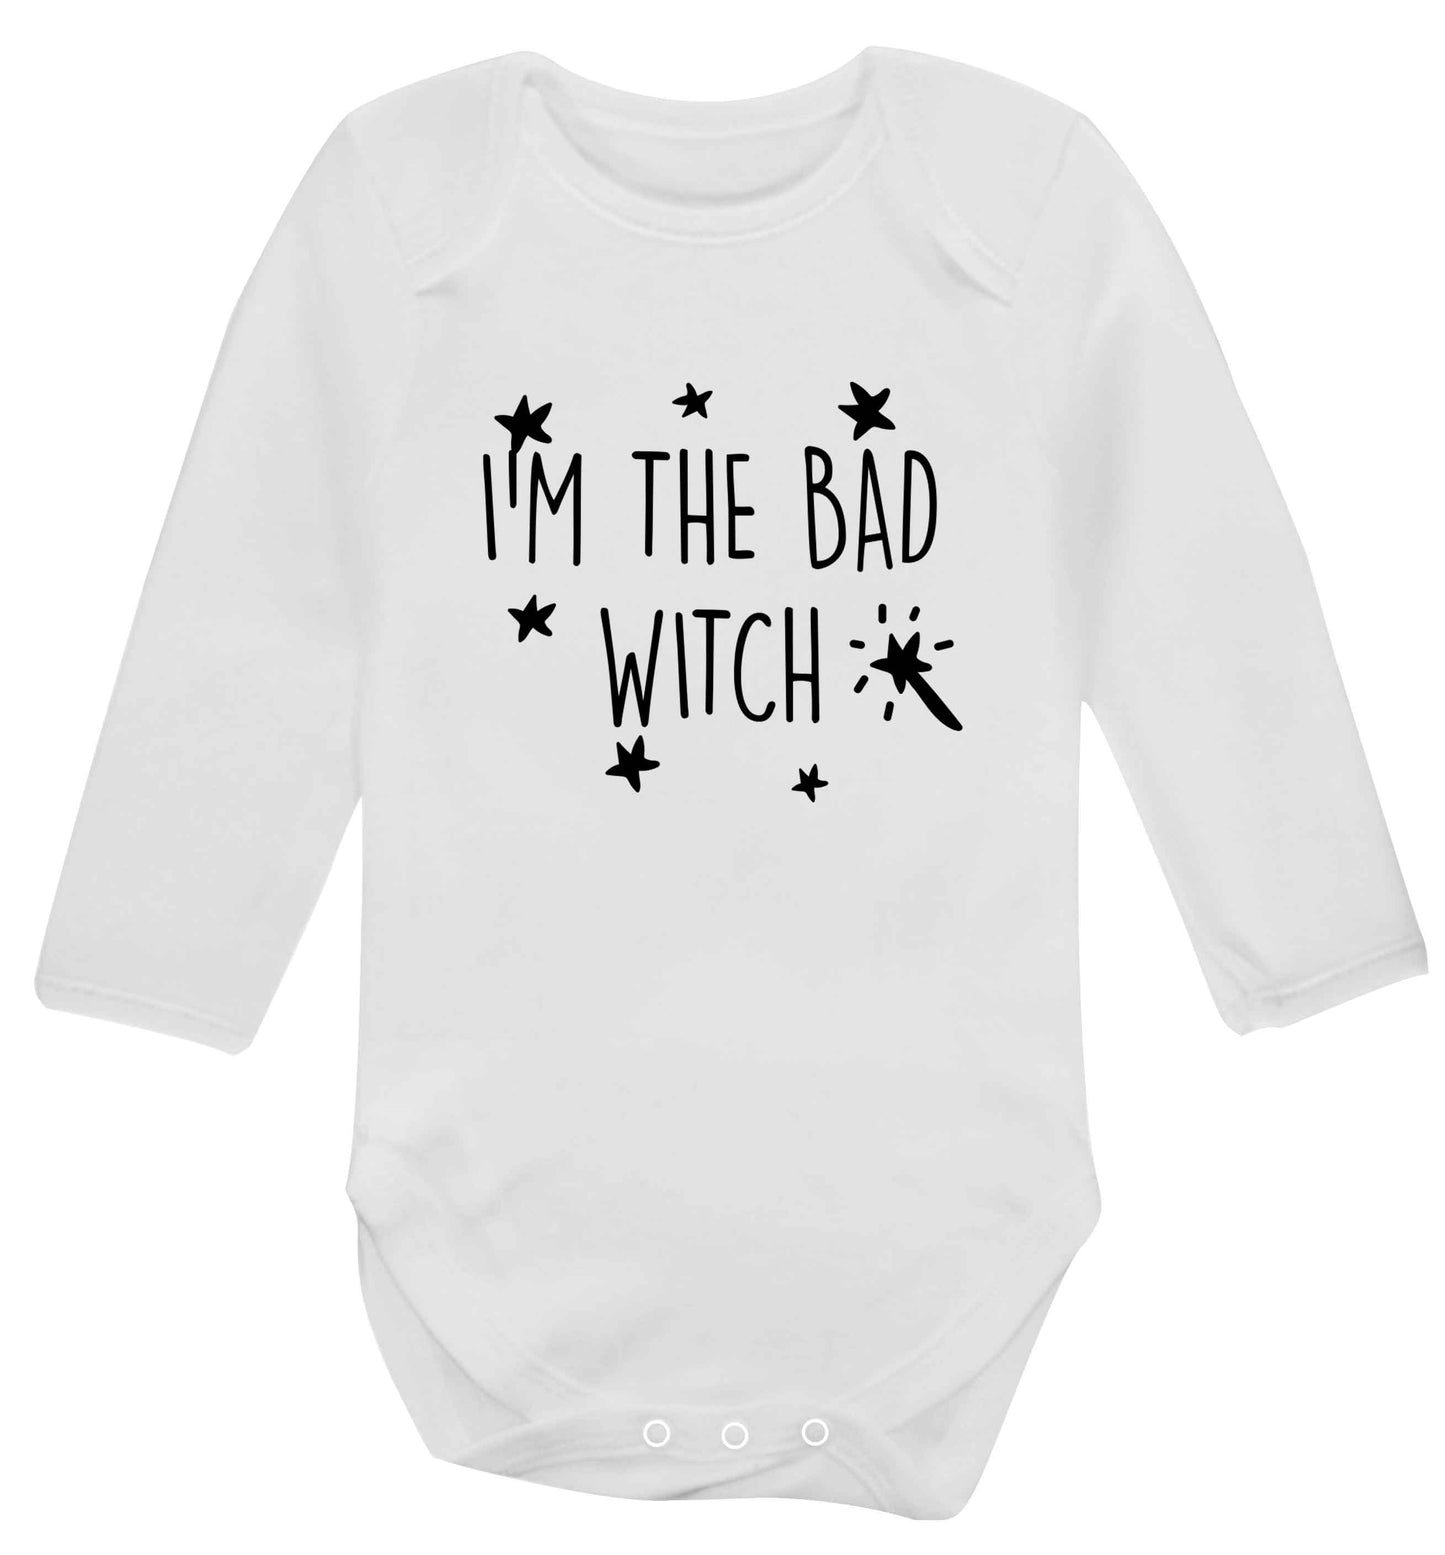 Bad witch baby vest long sleeved white 6-12 months